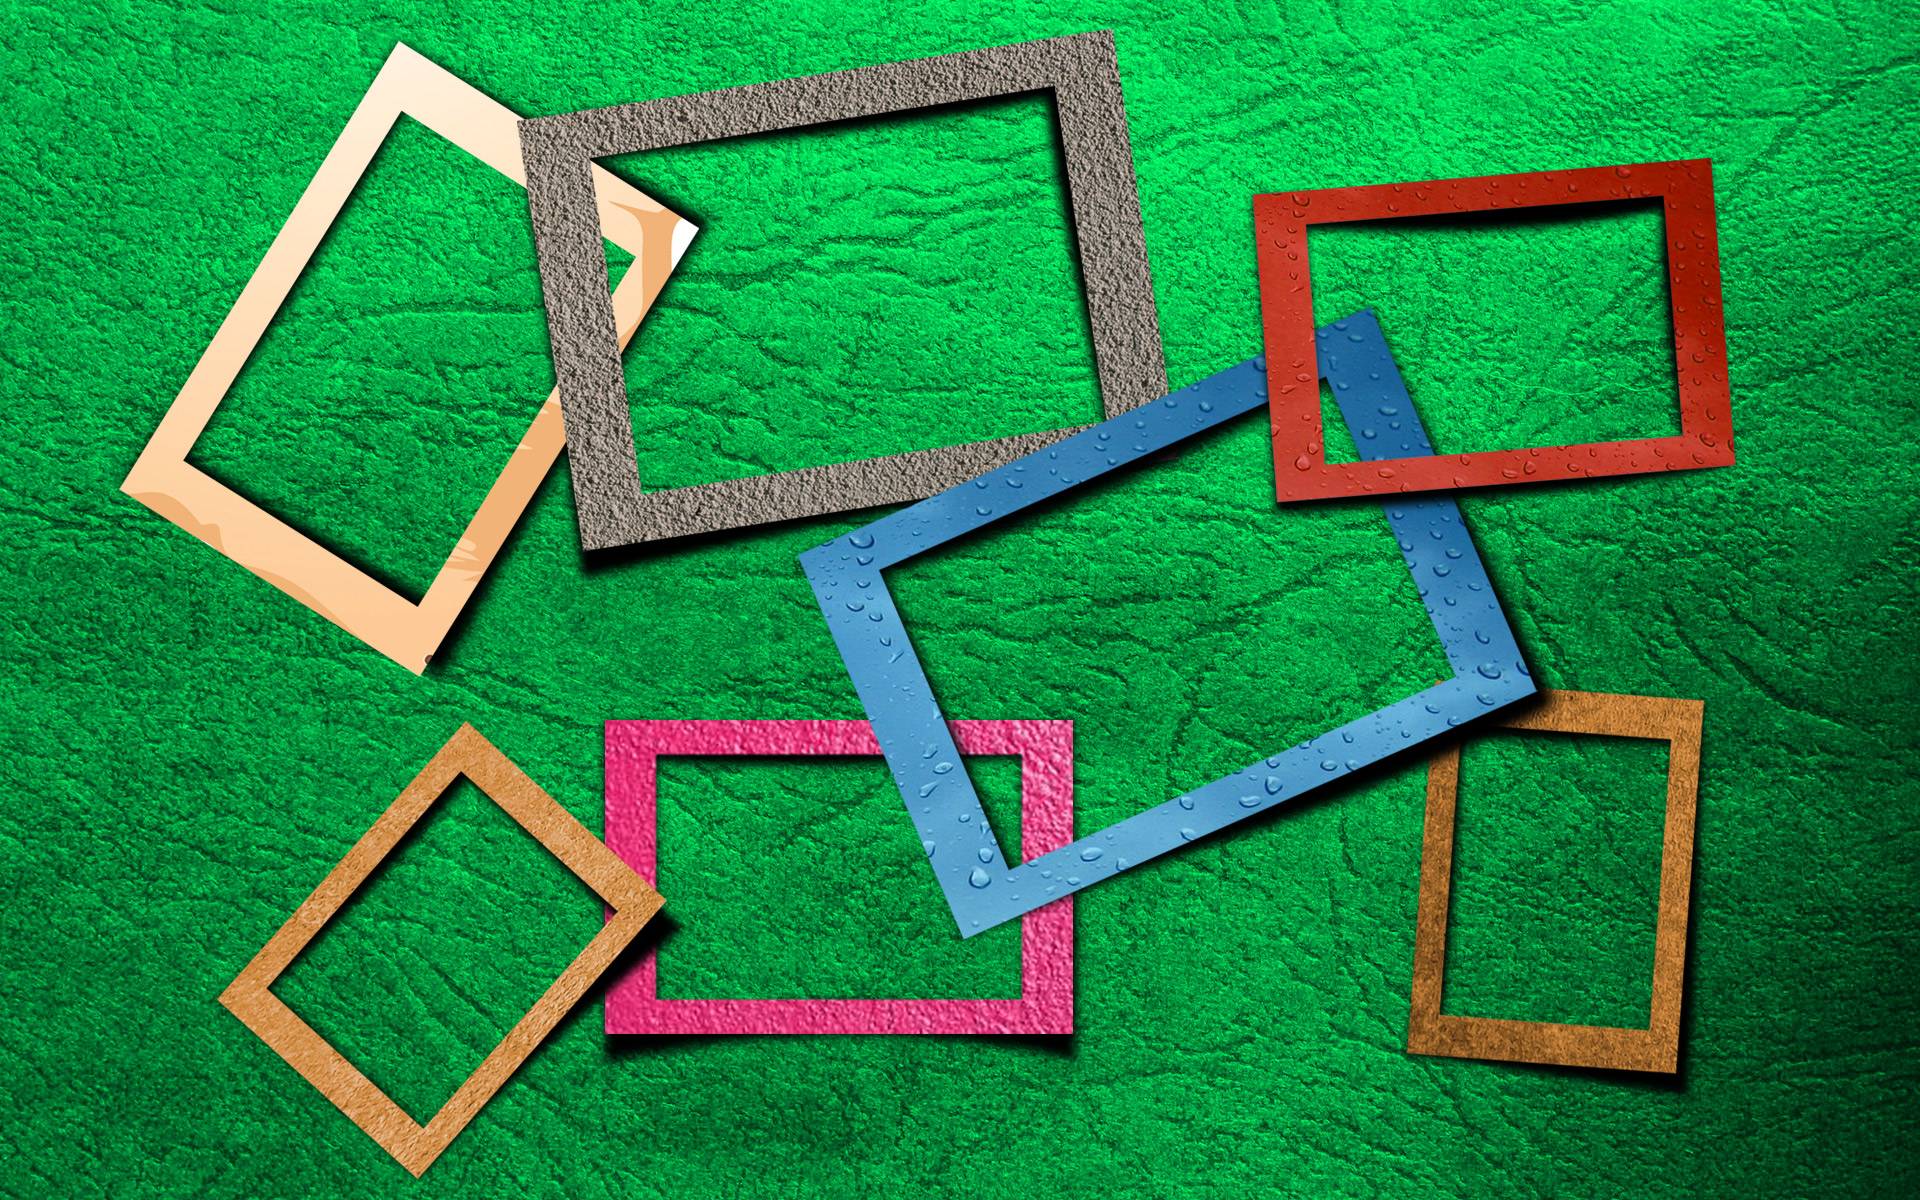 Textured picture frames wallpaper